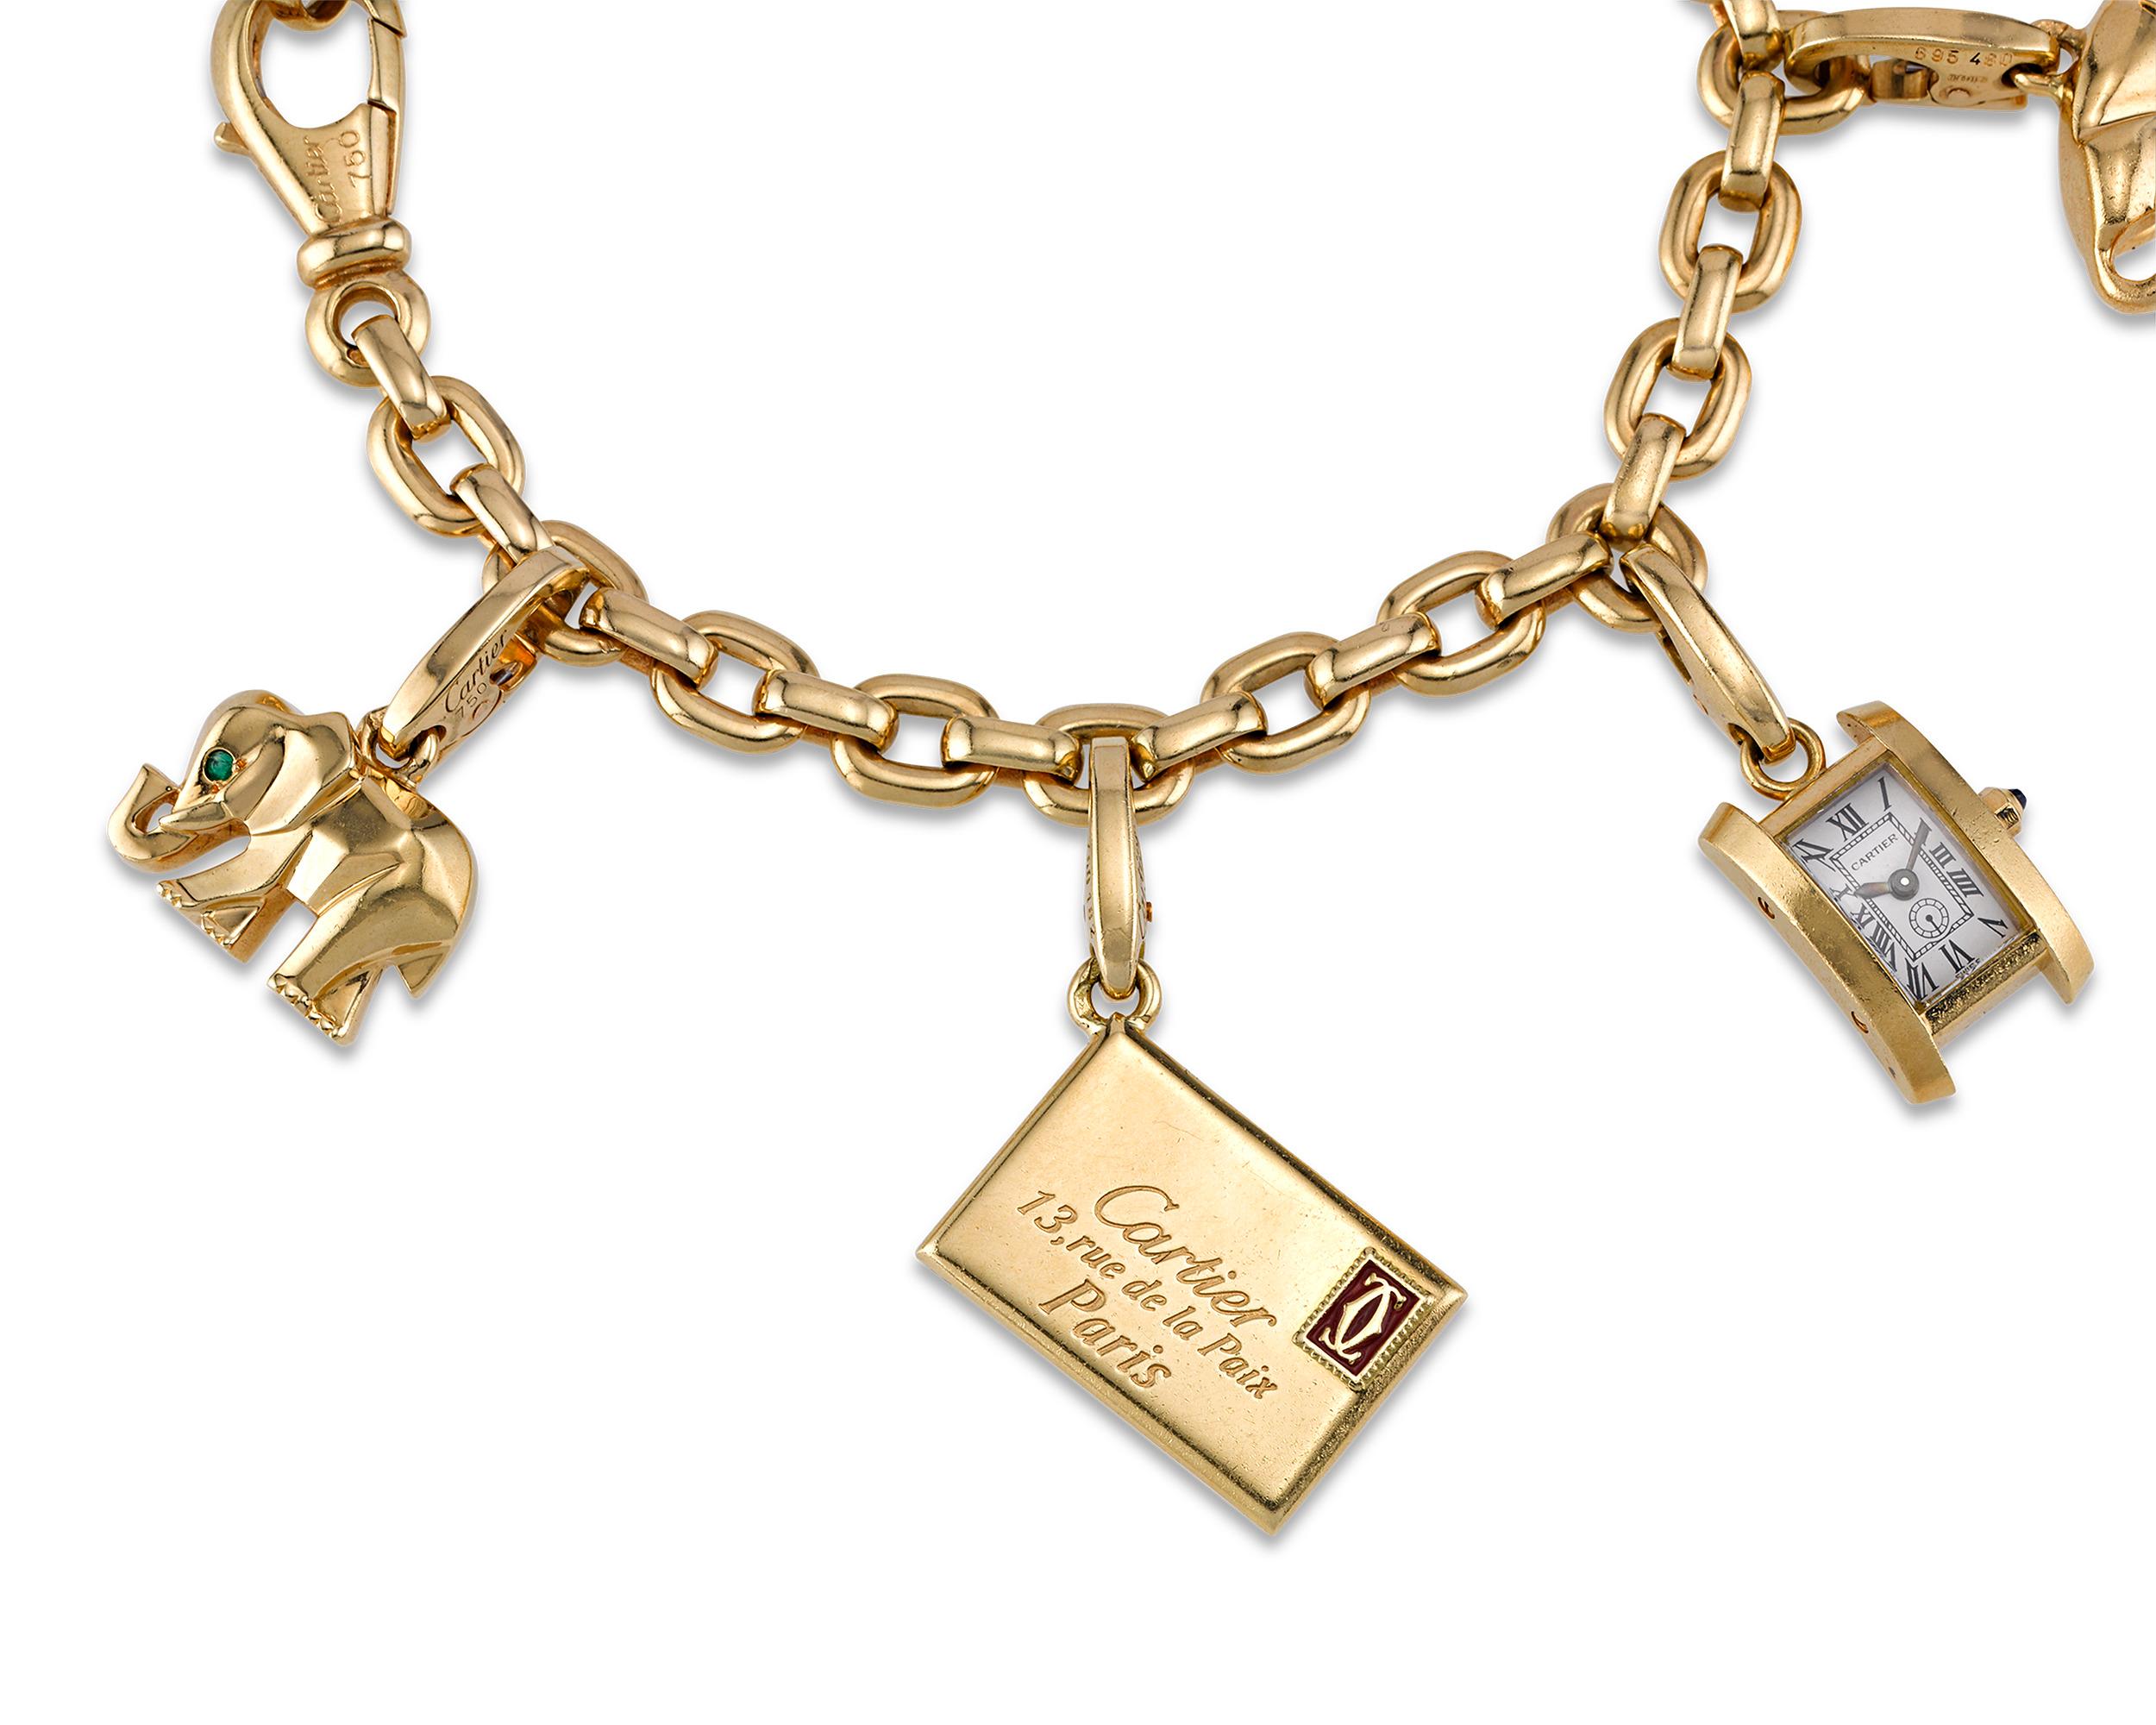 Some of the most iconic images associated with Cartier are featured in this vintage gold charm bracelet created by the legendary French jewelry house. The trace link chain design is perfect for amassing and displaying several charms. The charms